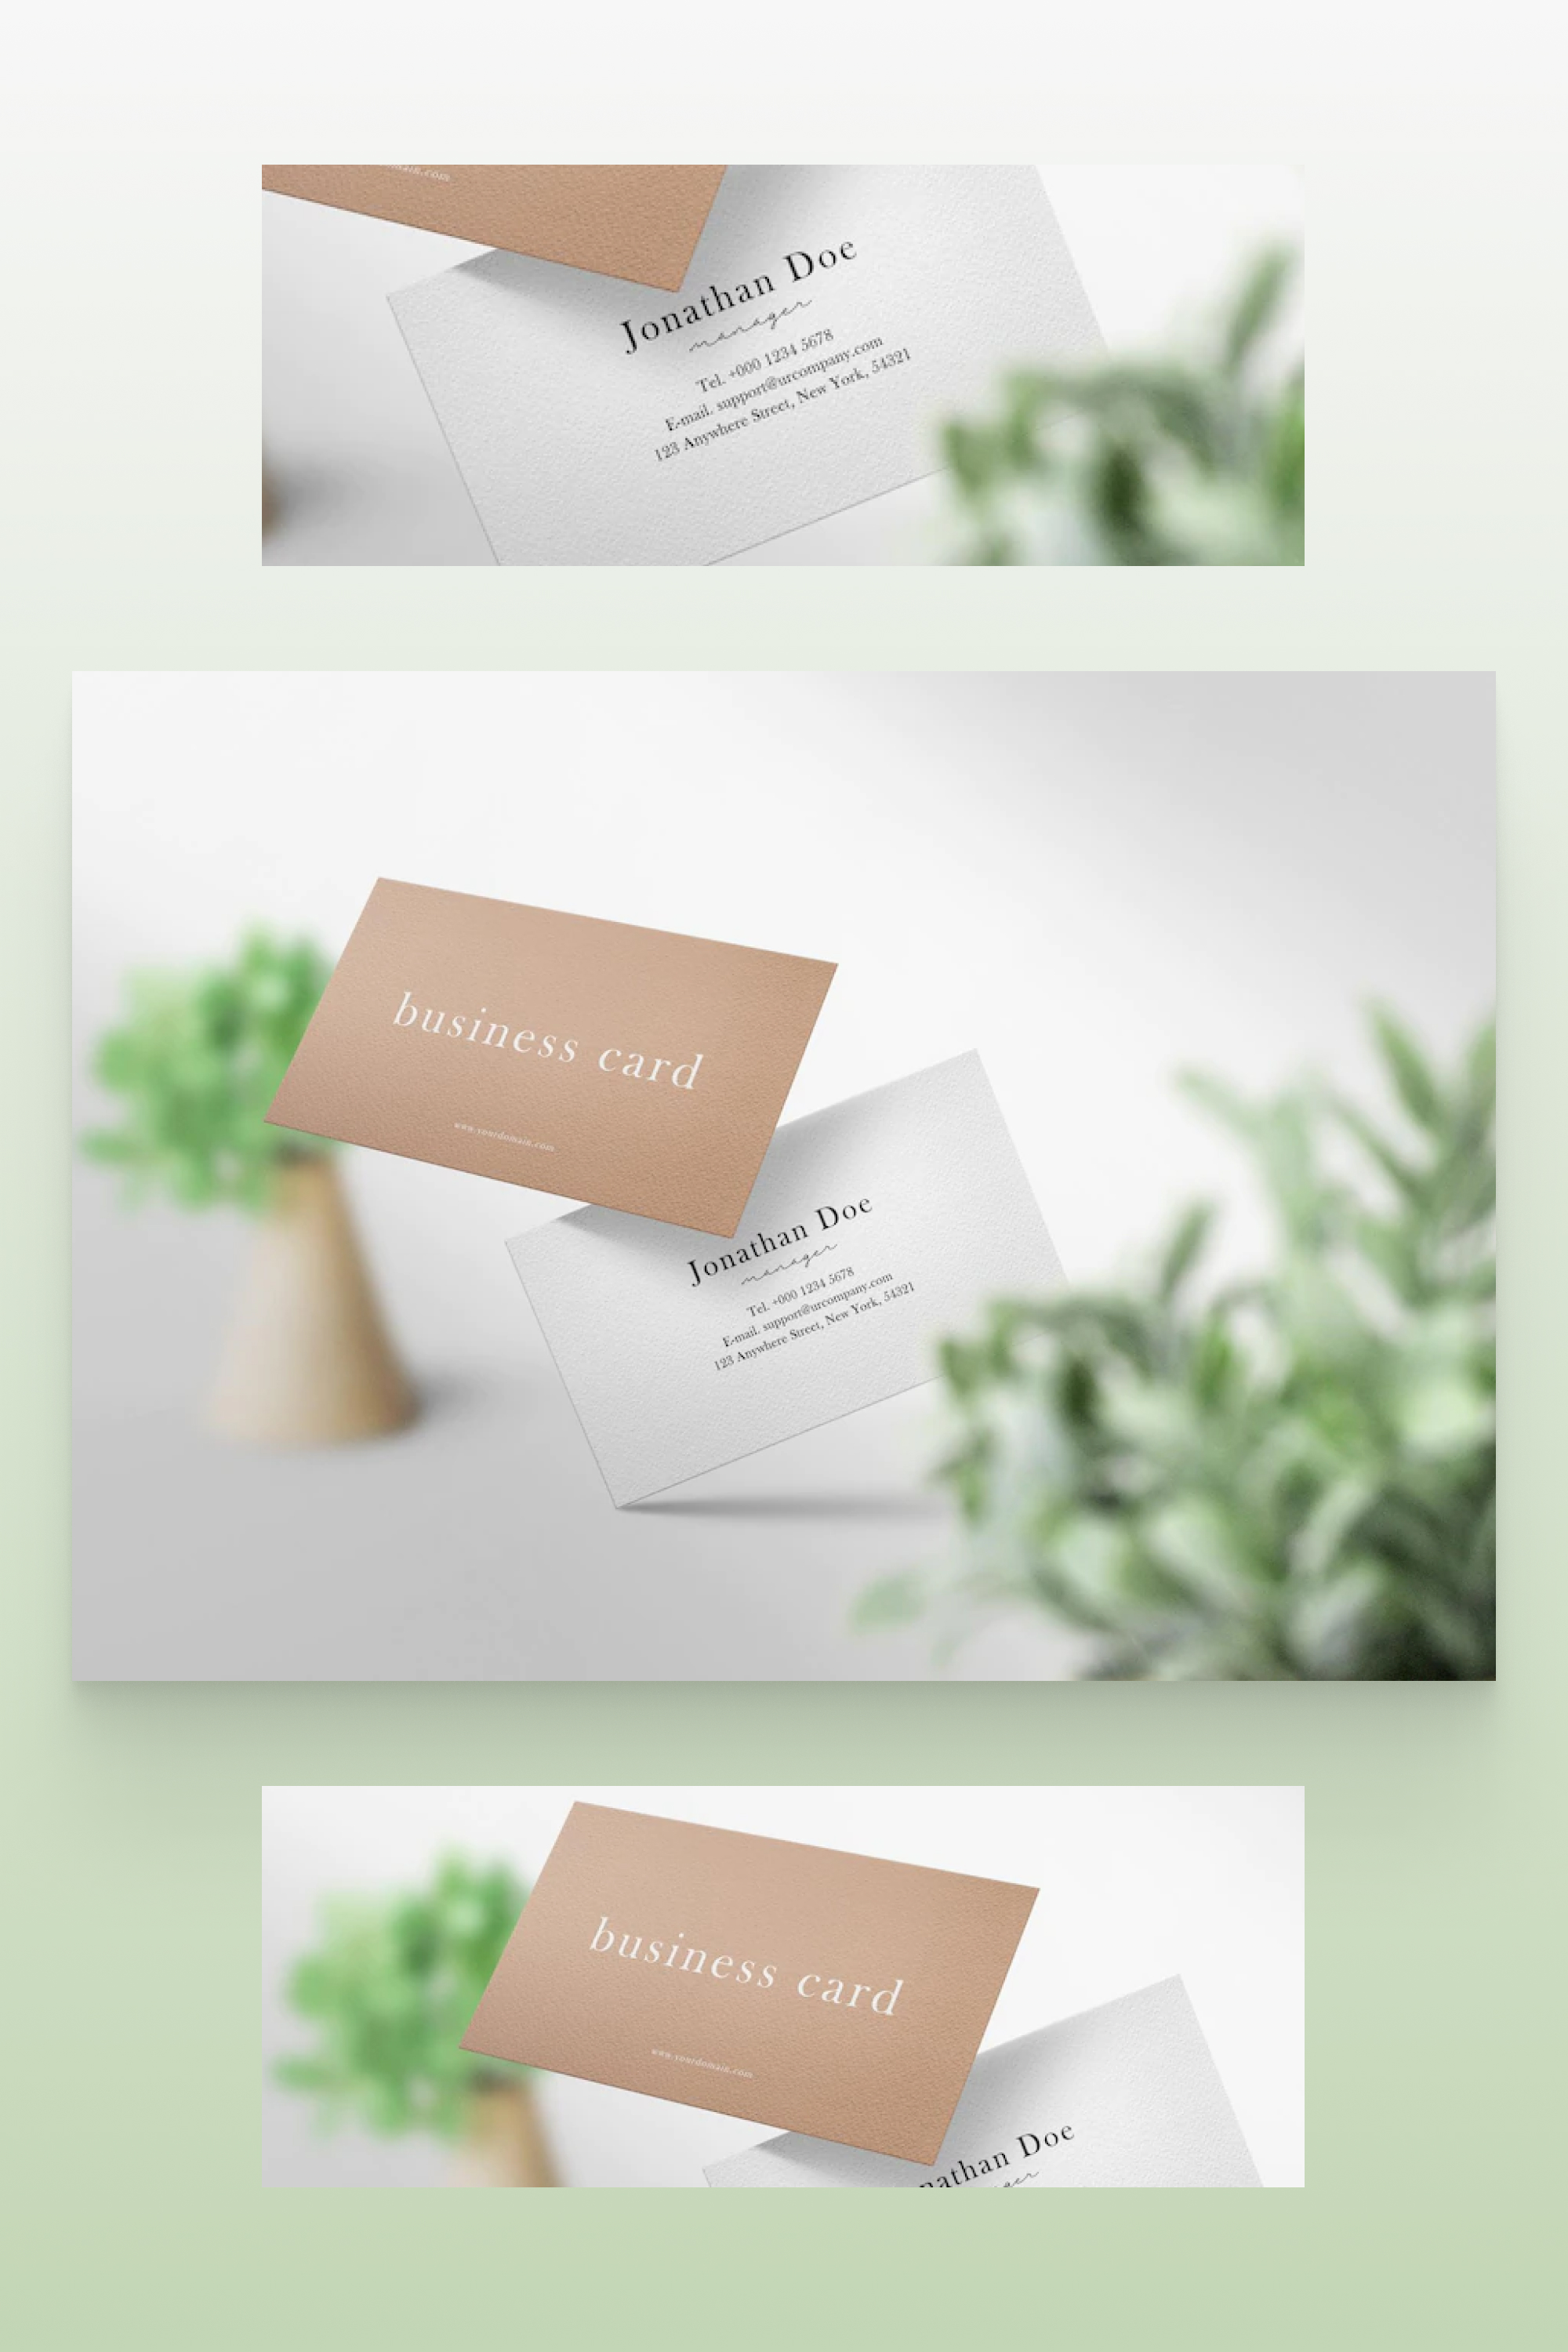 Brown and white business cards on a white background with a vase of flowers.